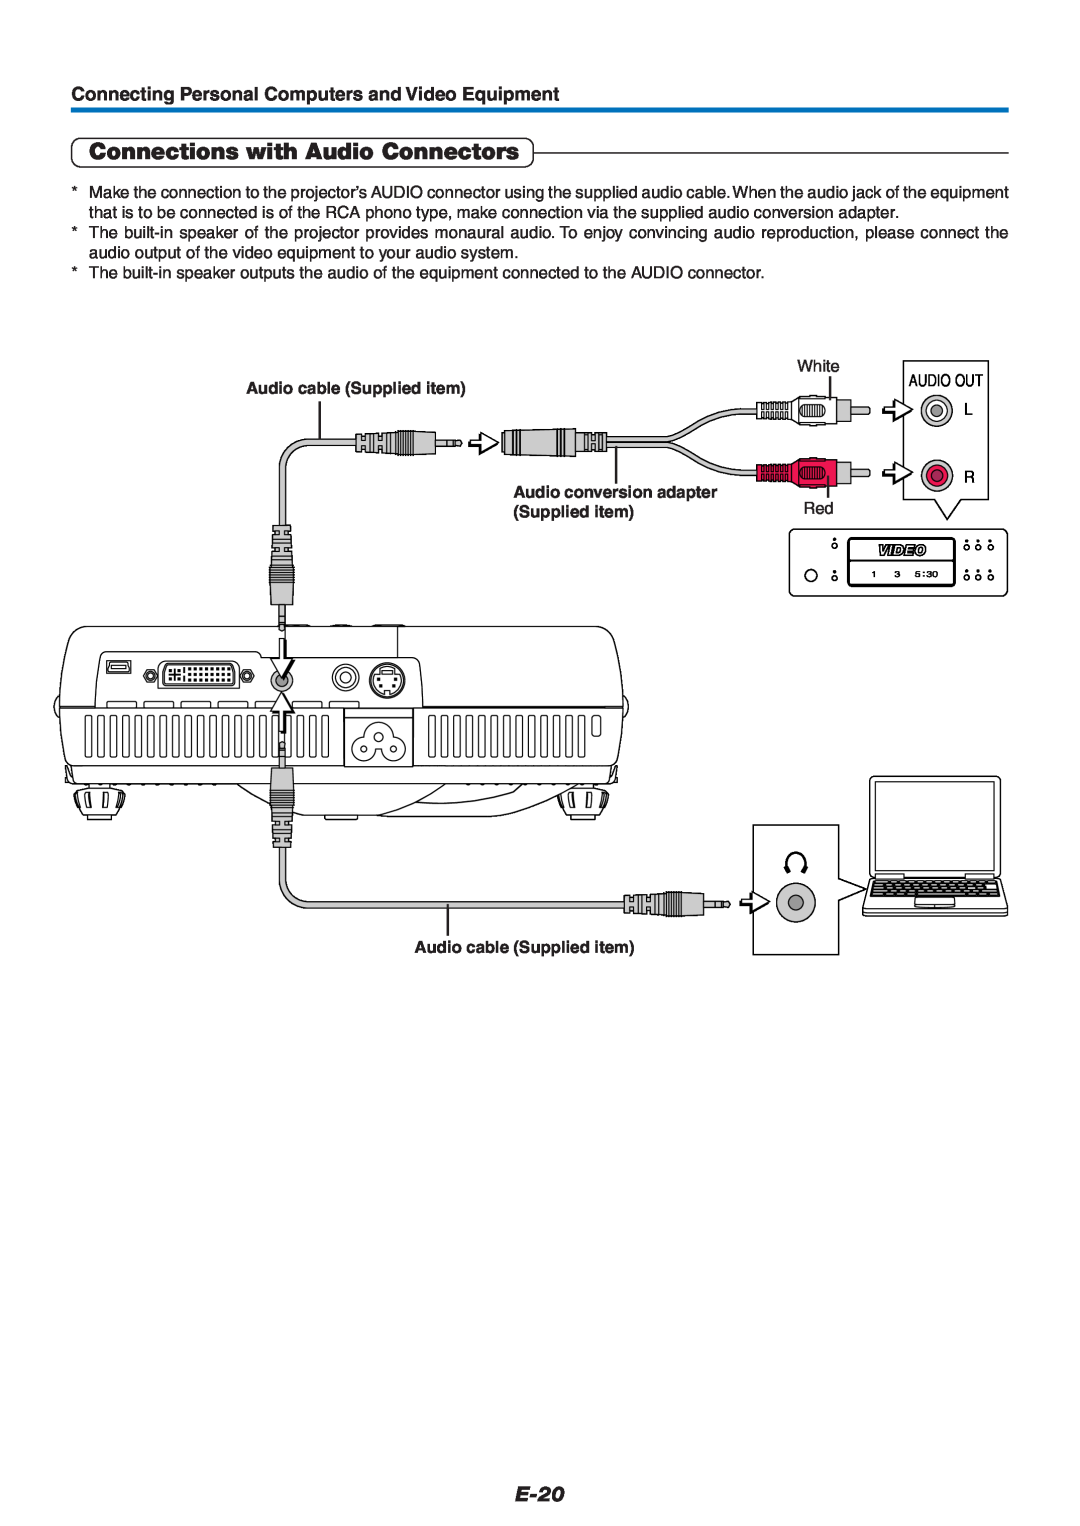 PLUS Vision U4-232 user manual Connections with Audio Connectors, E-20, Connecting Personal Computers and Video Equipment 